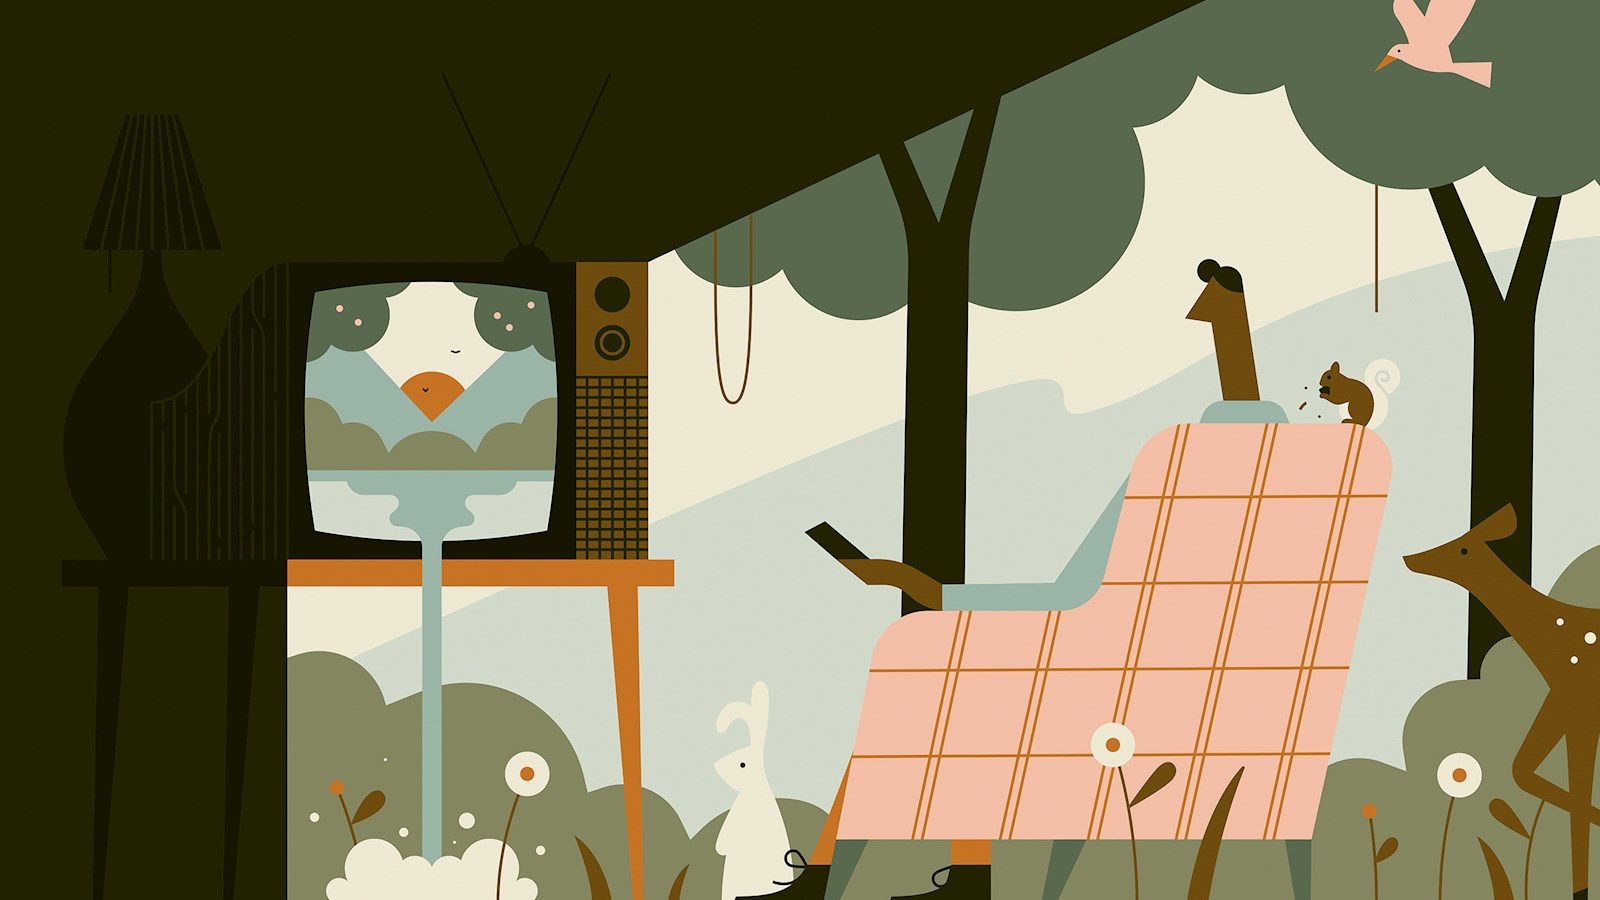 Illustration of person watching television. The light of the television casts an image of a greener future.